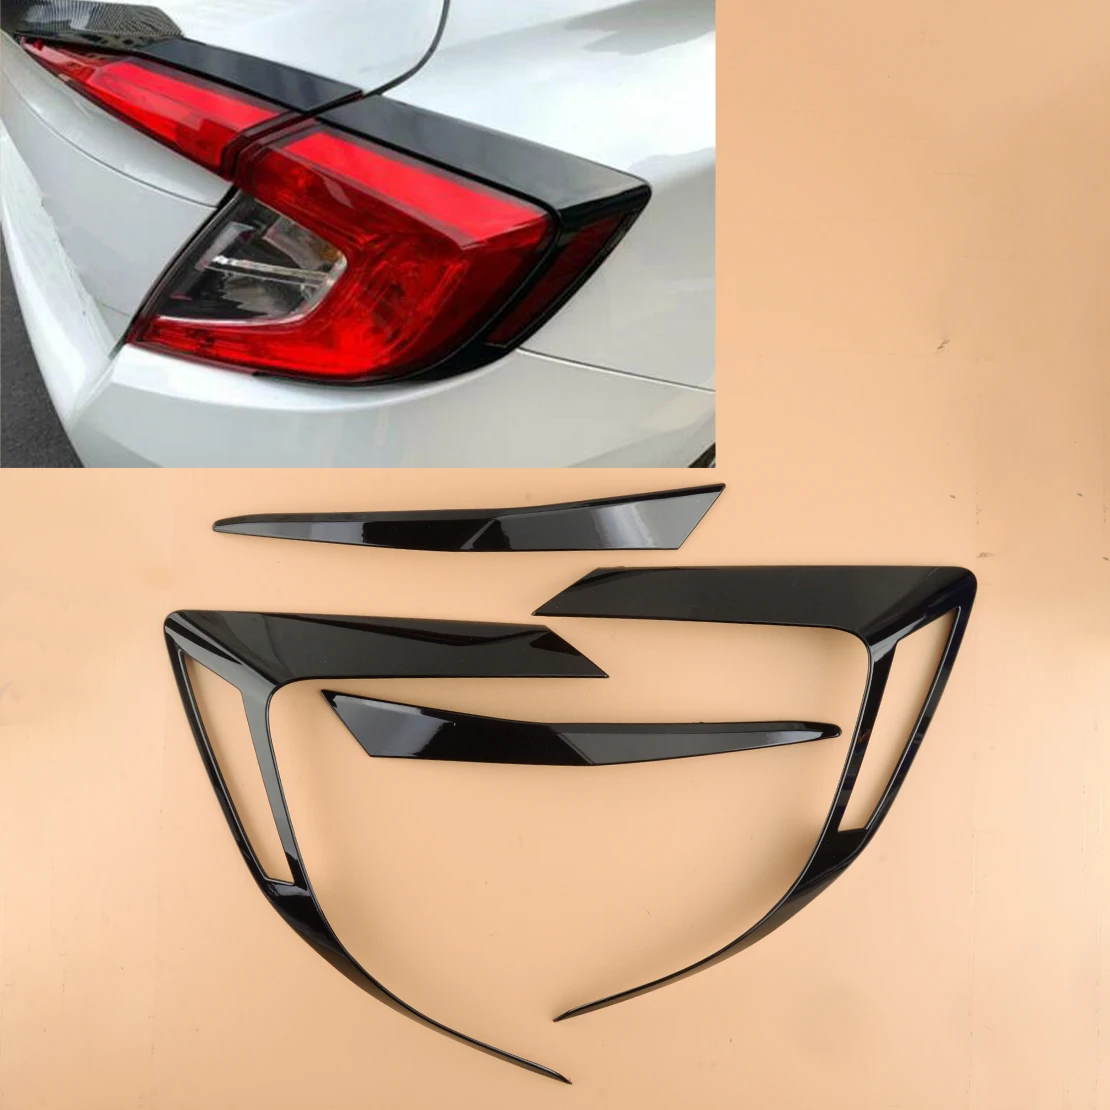 4pcs/Set Glossy Black Tail Rear Light Lamp Cover Trim ABS Fit for Honda Civic 10th Sedan 2016 2017 2018 2019 2020 Replacement